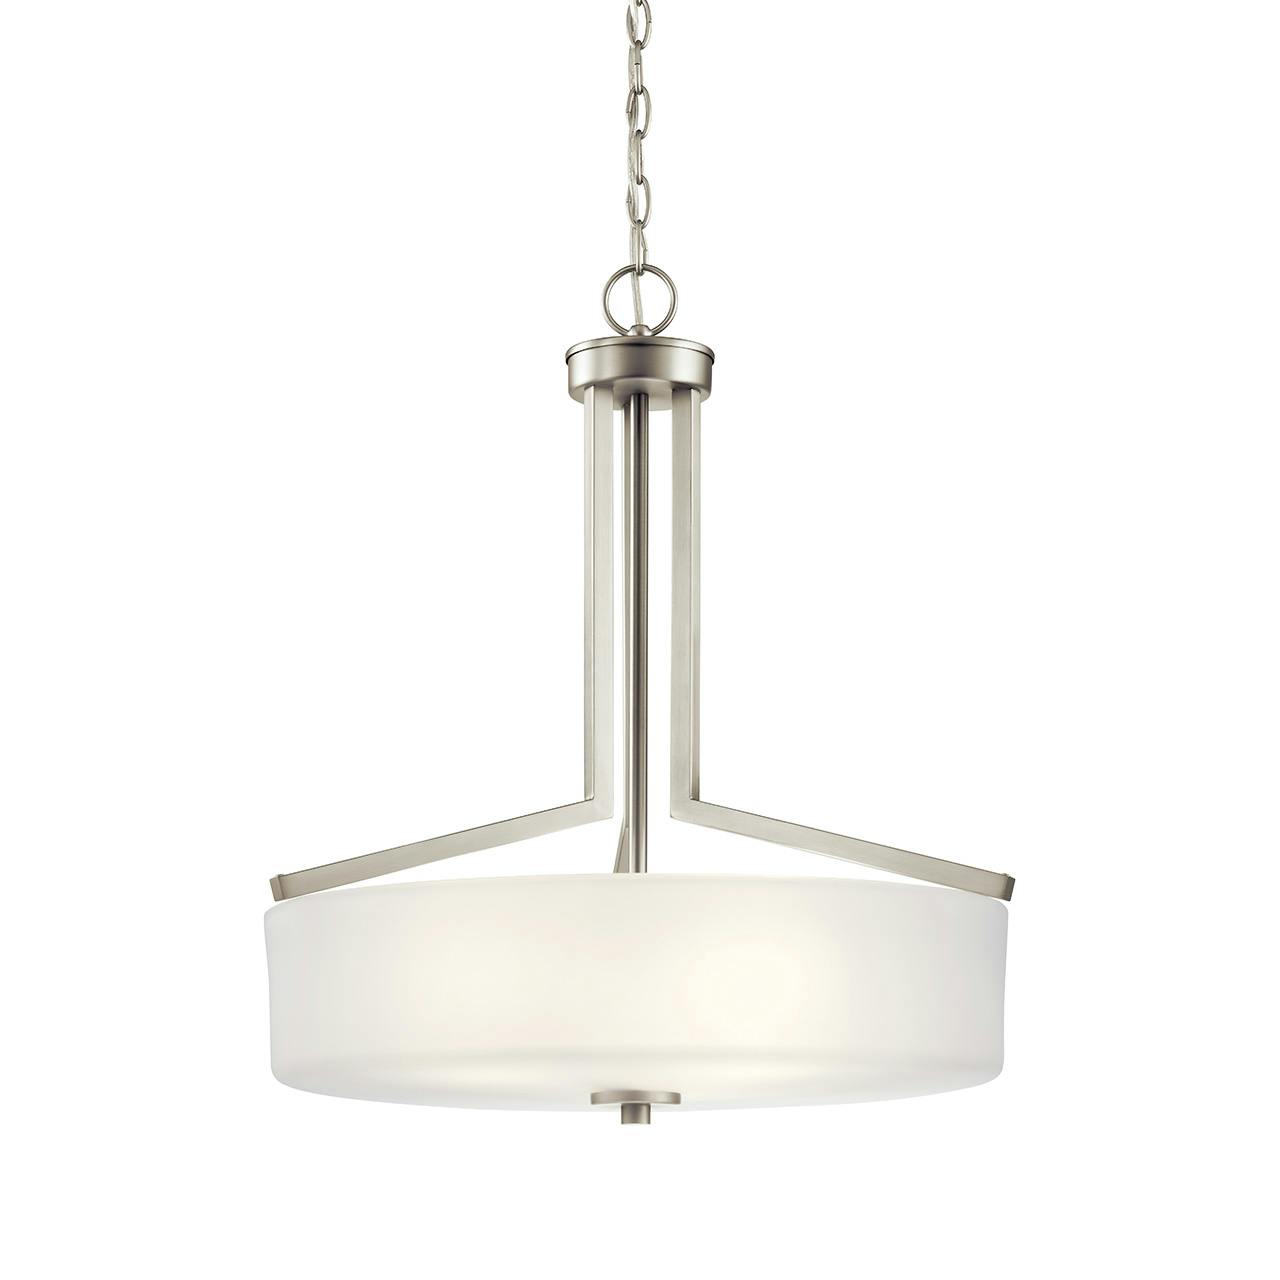 Skagos™ 3 Light Pendant Brushed Nickel without the canopy on a white background